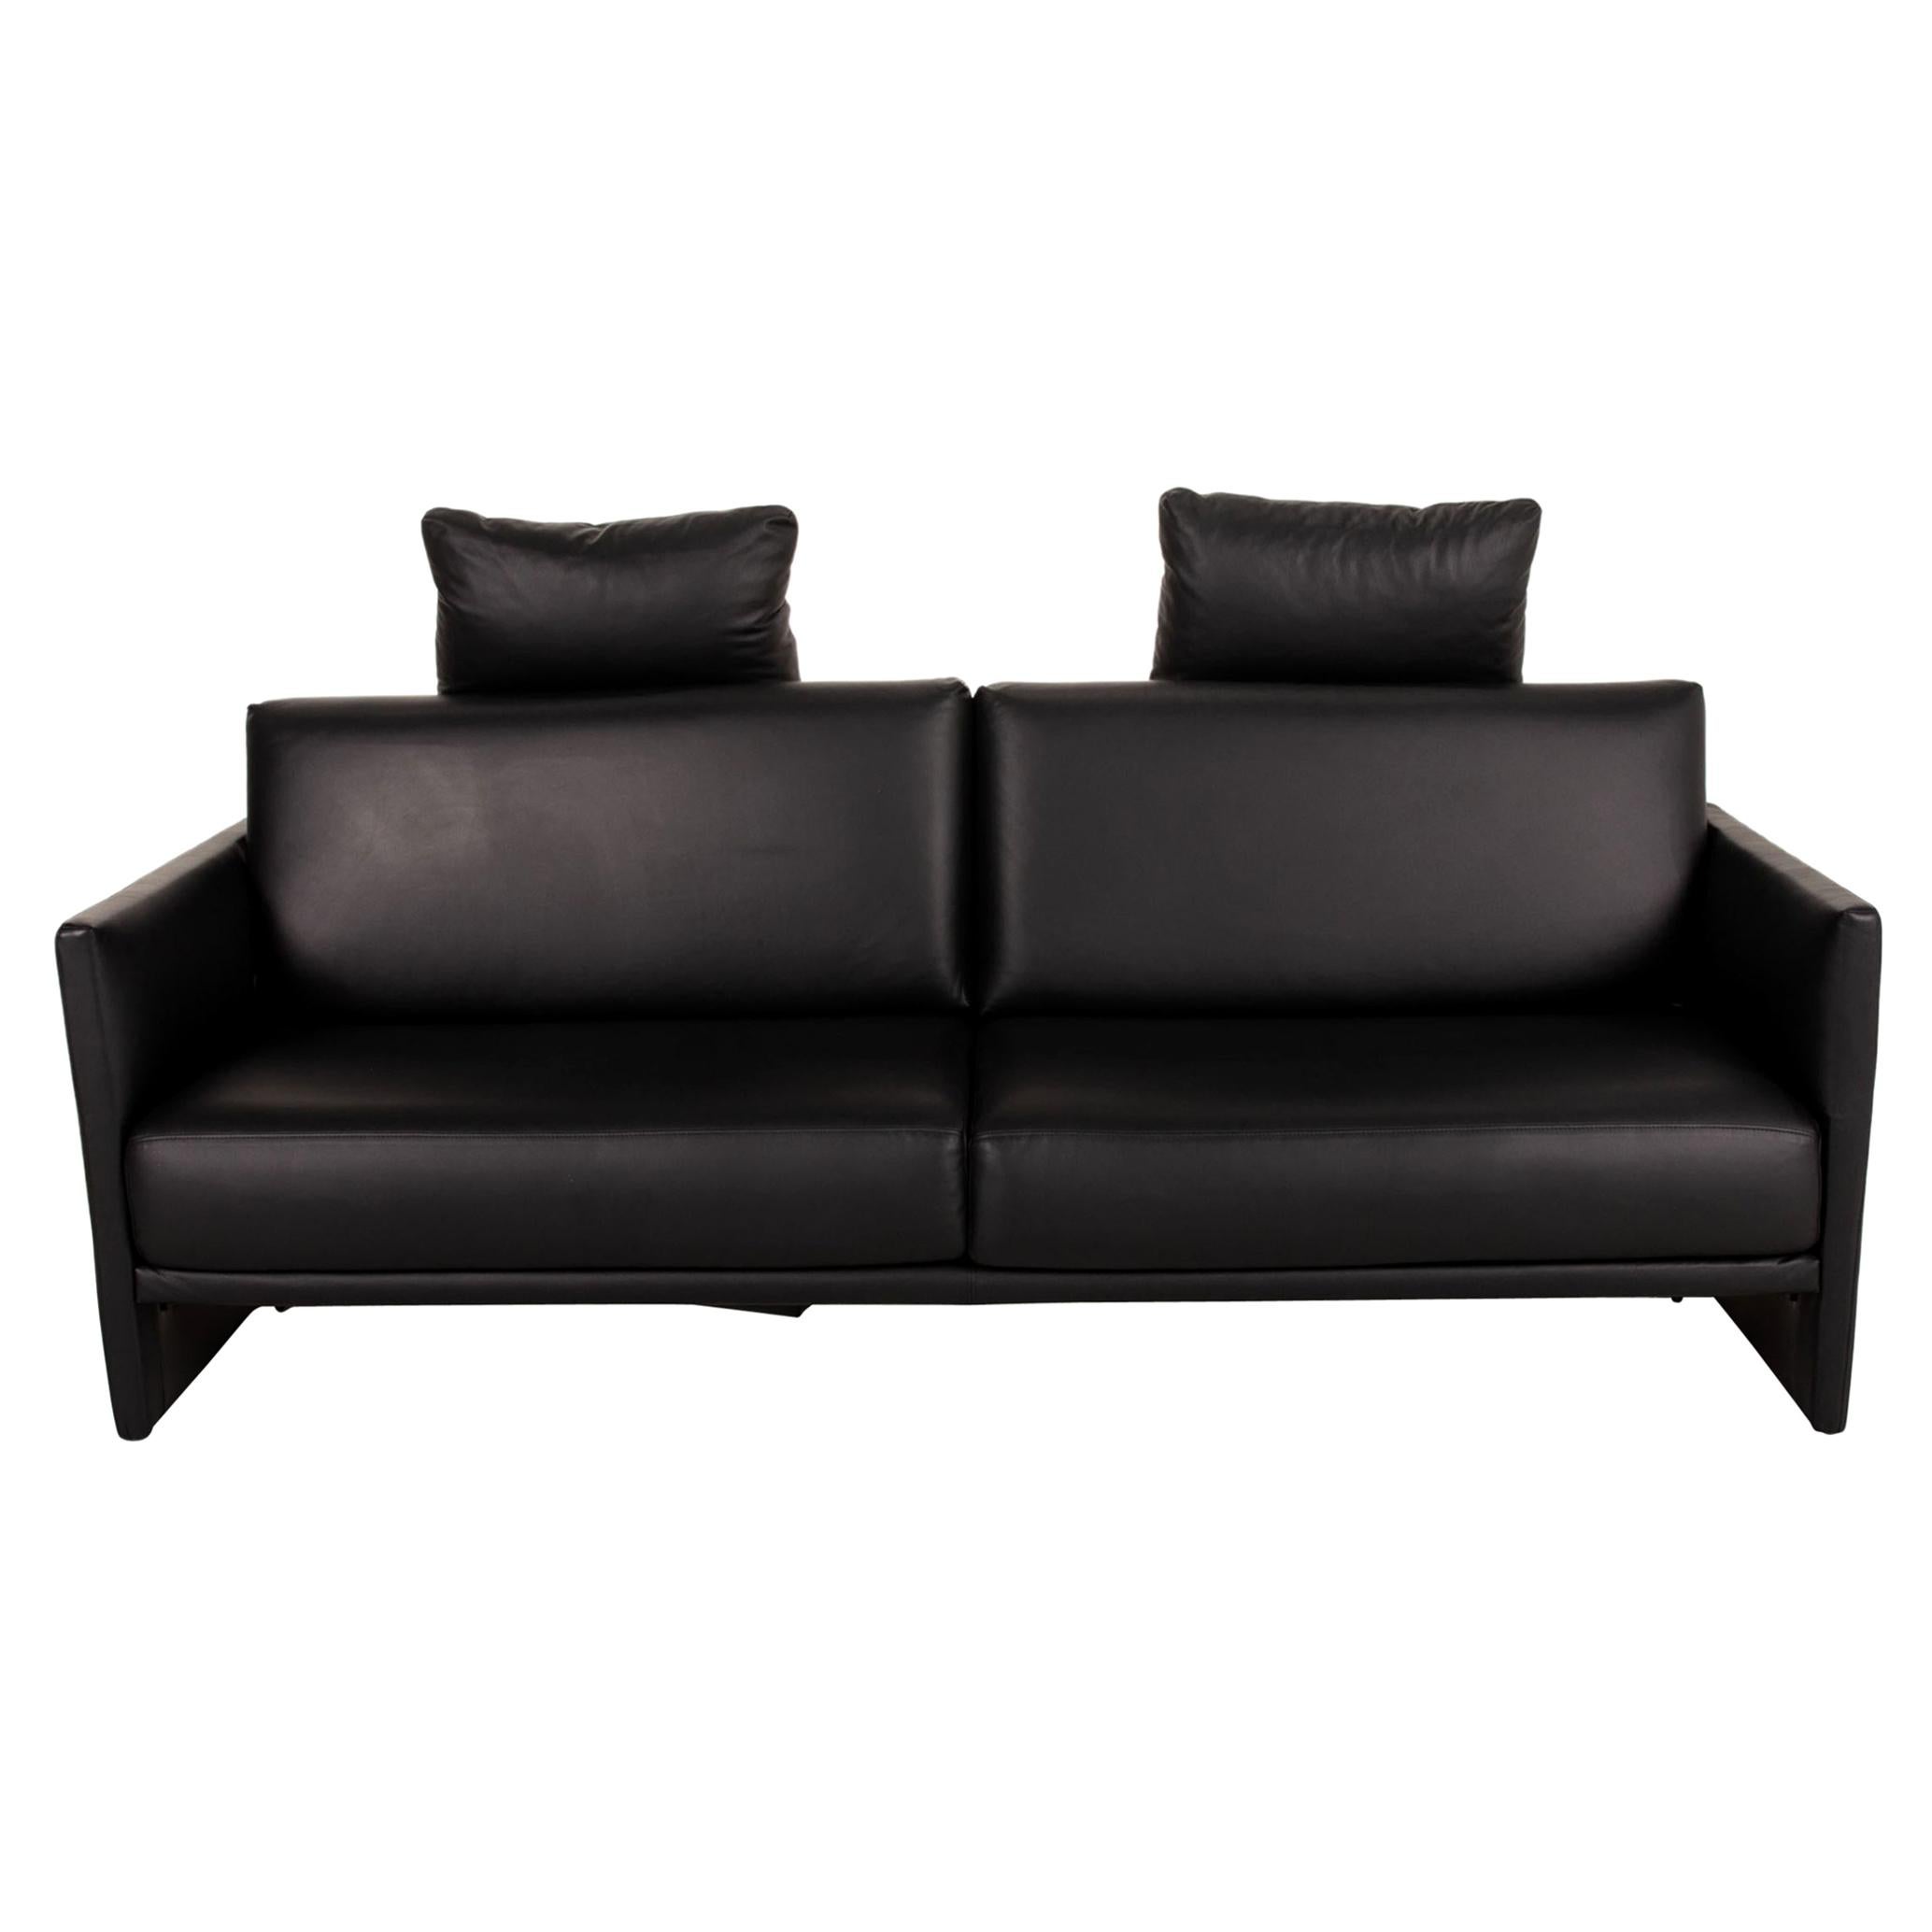 Rolf Benz Cara Leather Sofa Black Three-Seater Function Couch For Sale